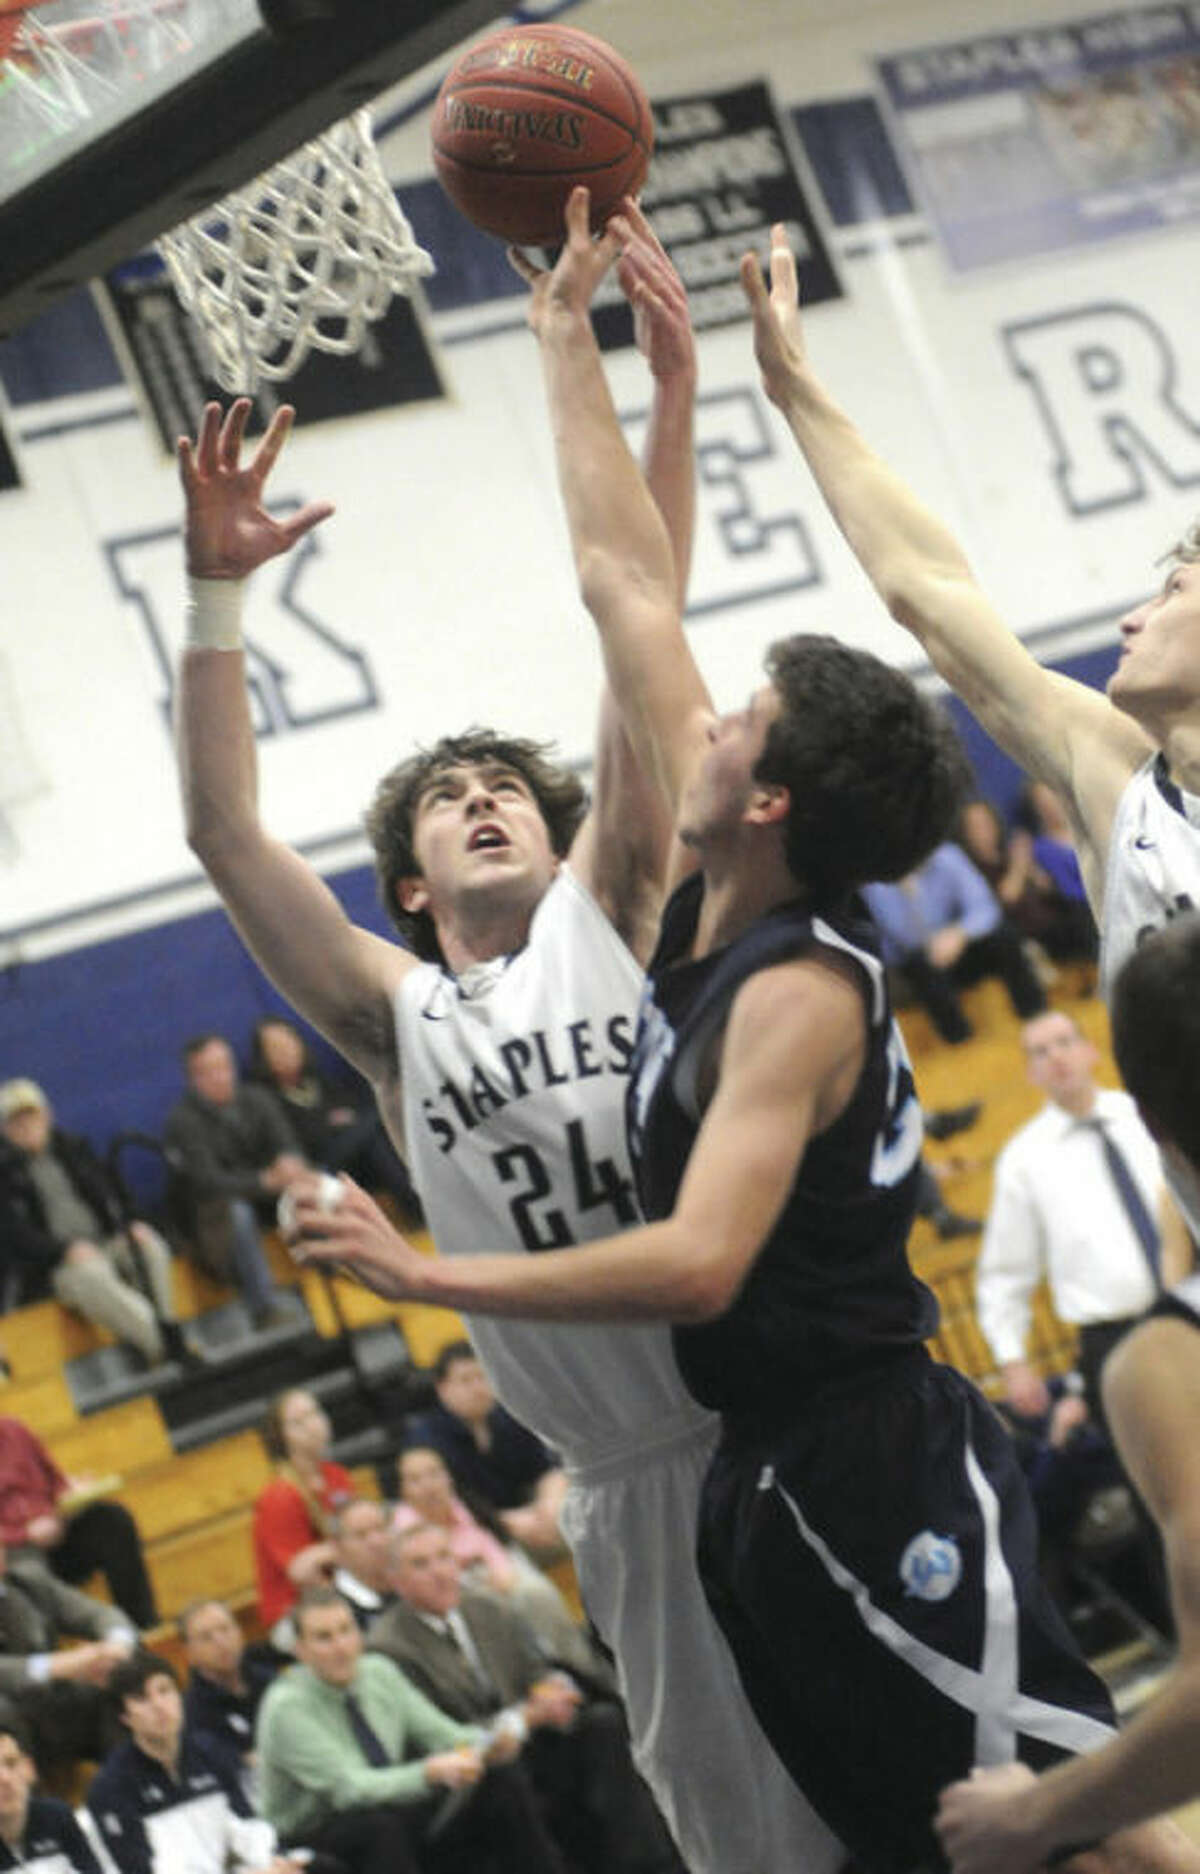 Hour photo/Matthew Vinci Ross Whelan of Staples, left, goes up for a shot despite the defensive efforts of Wilton's Weston Wilbur. The Wreckers won Tuesday's game, 54-49.